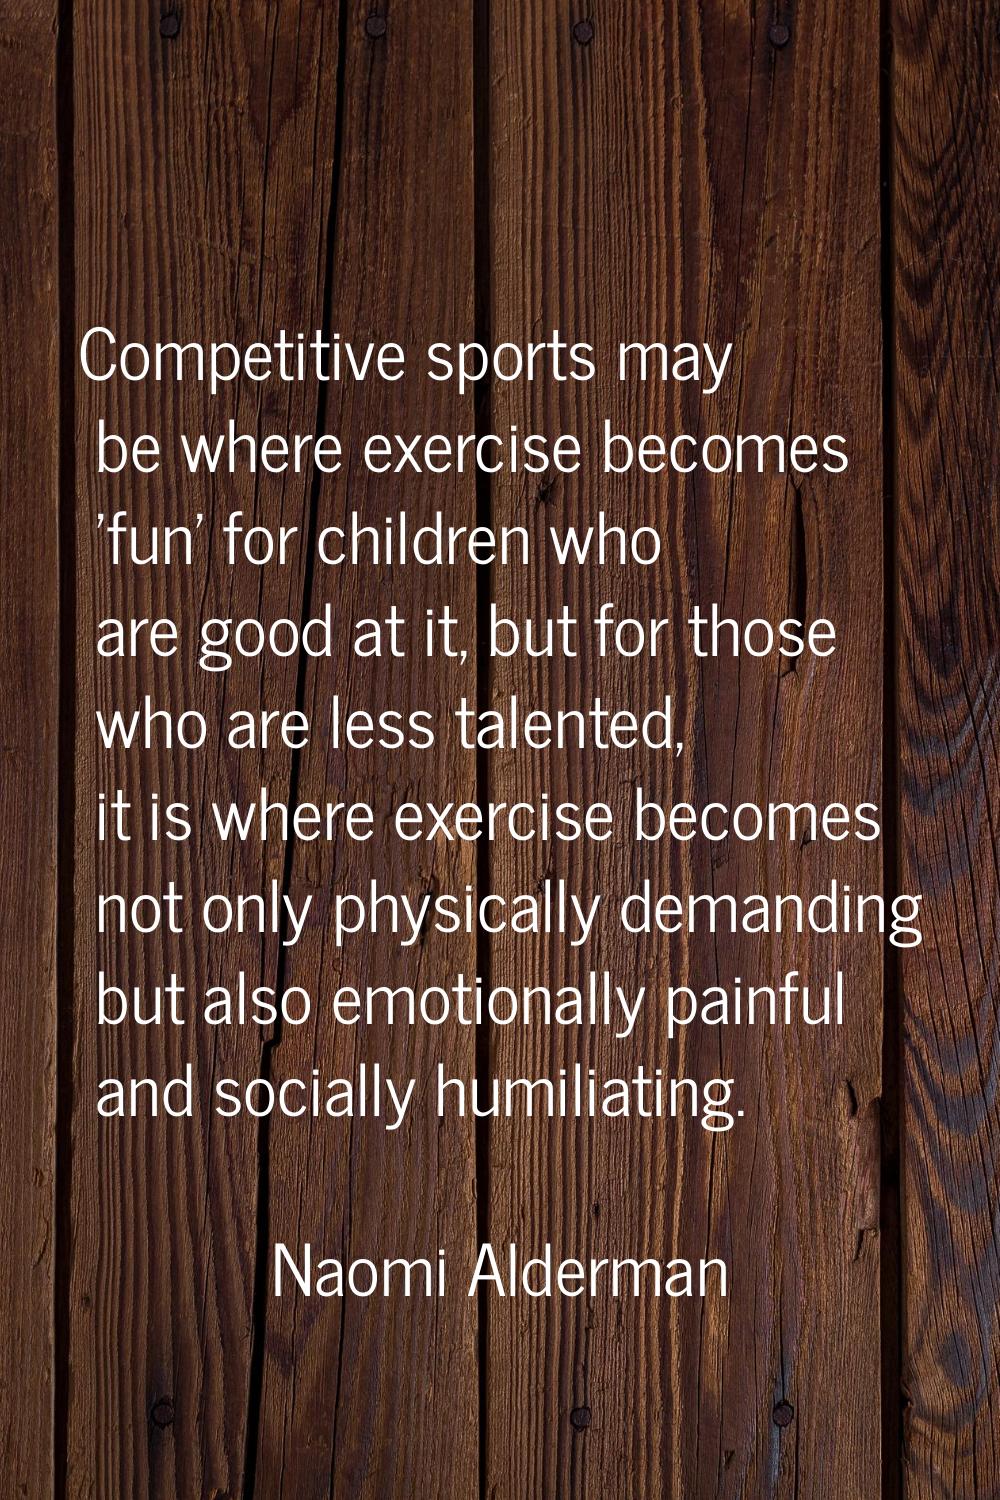 Competitive sports may be where exercise becomes 'fun' for children who are good at it, but for tho